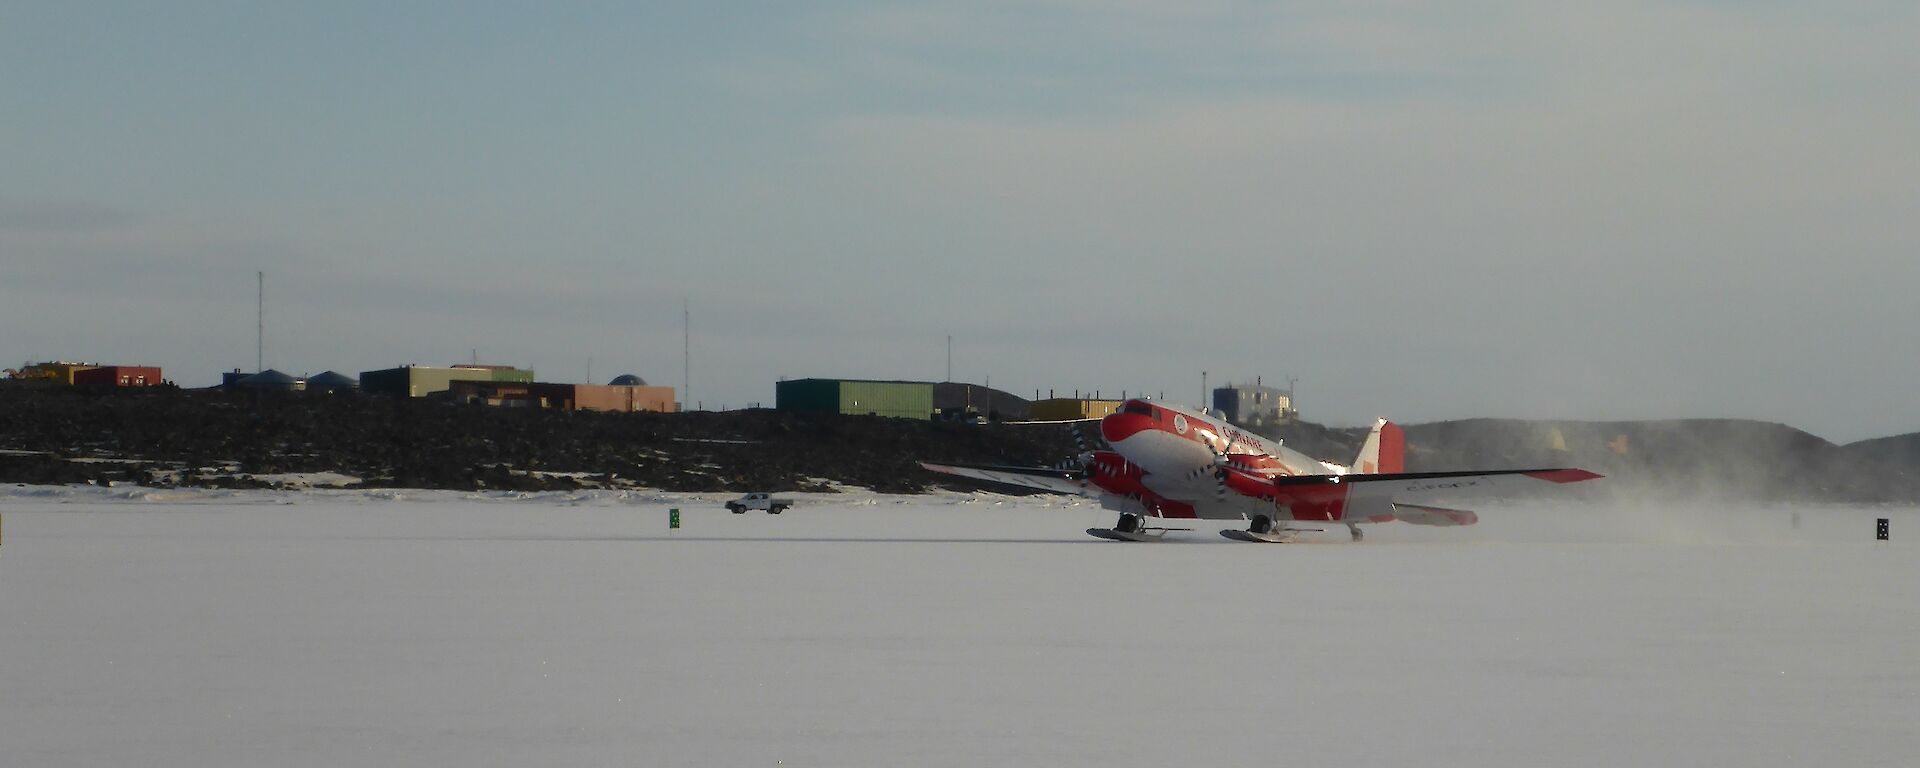 The Basler DC 3 landing on the sea ice with Davis station in the background.